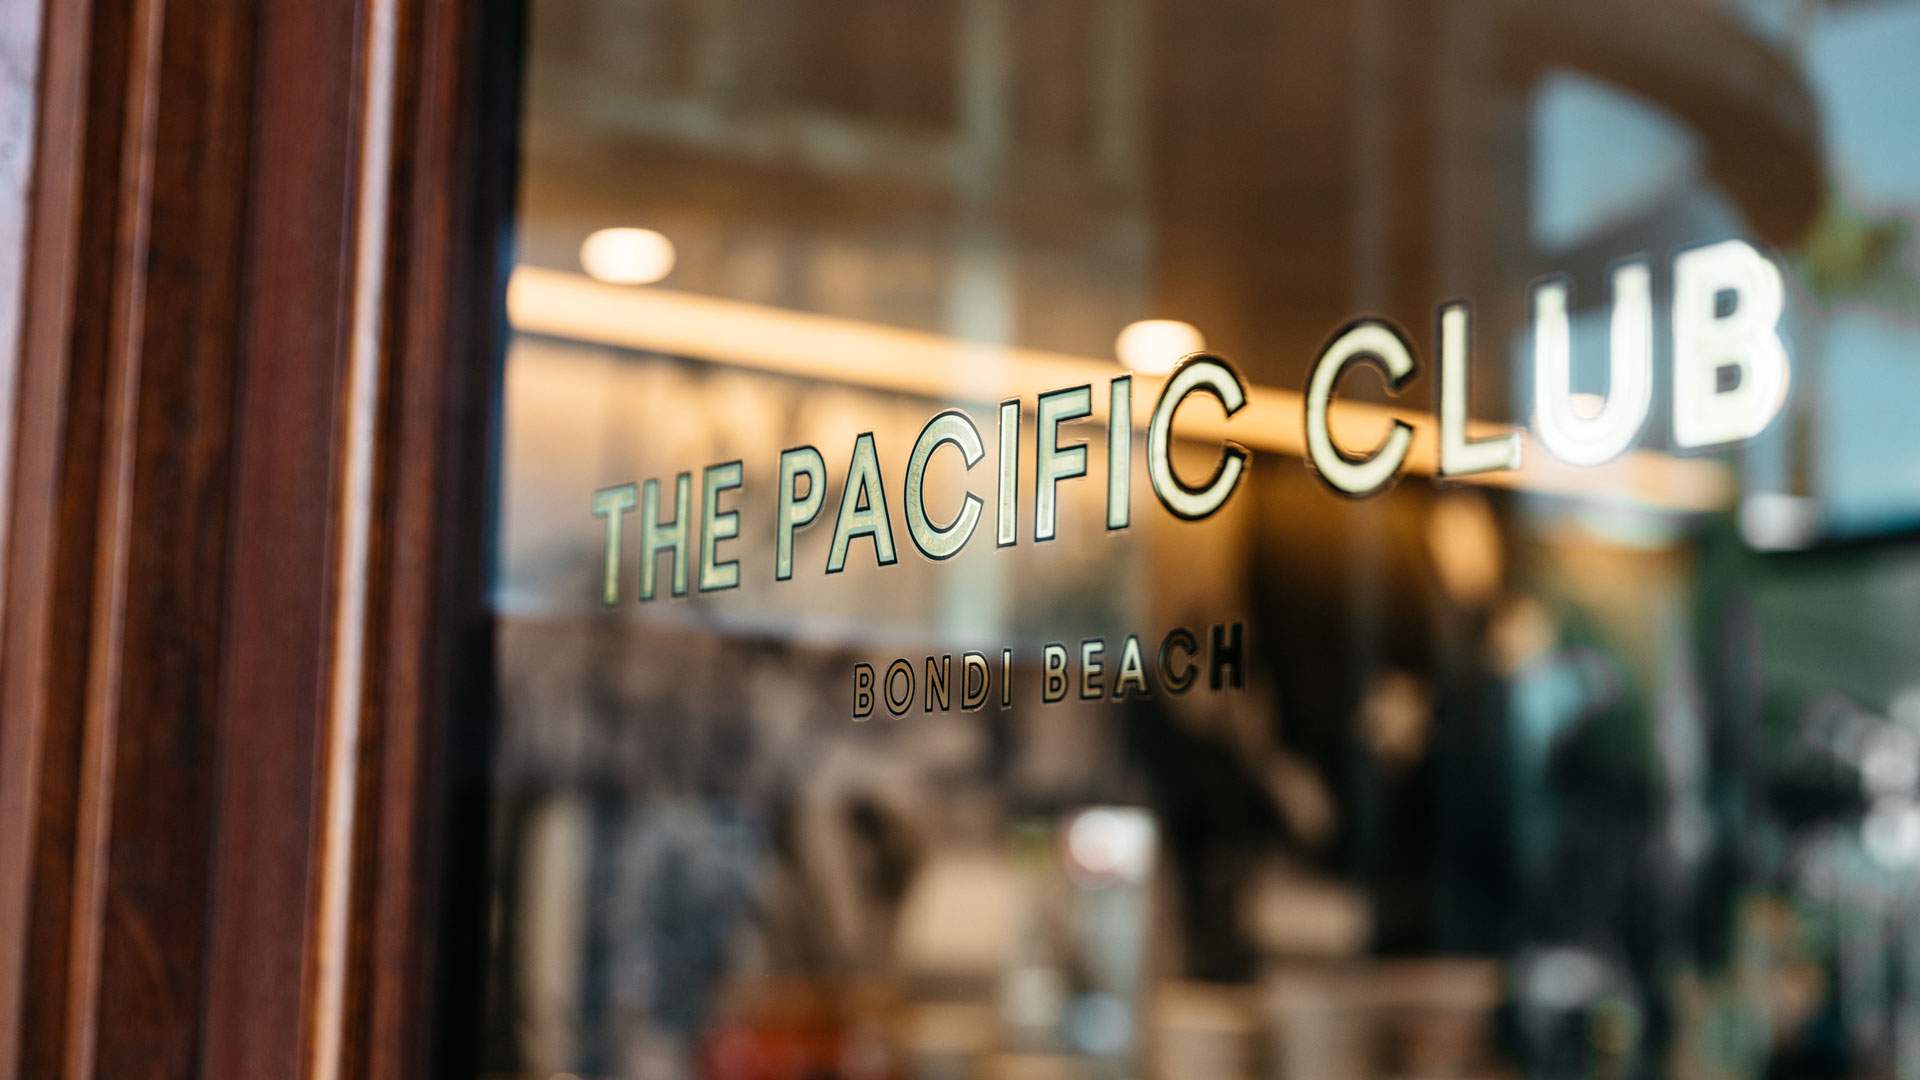 The Pacific Club Is Bondi's New Australian All-Day Dining Destination